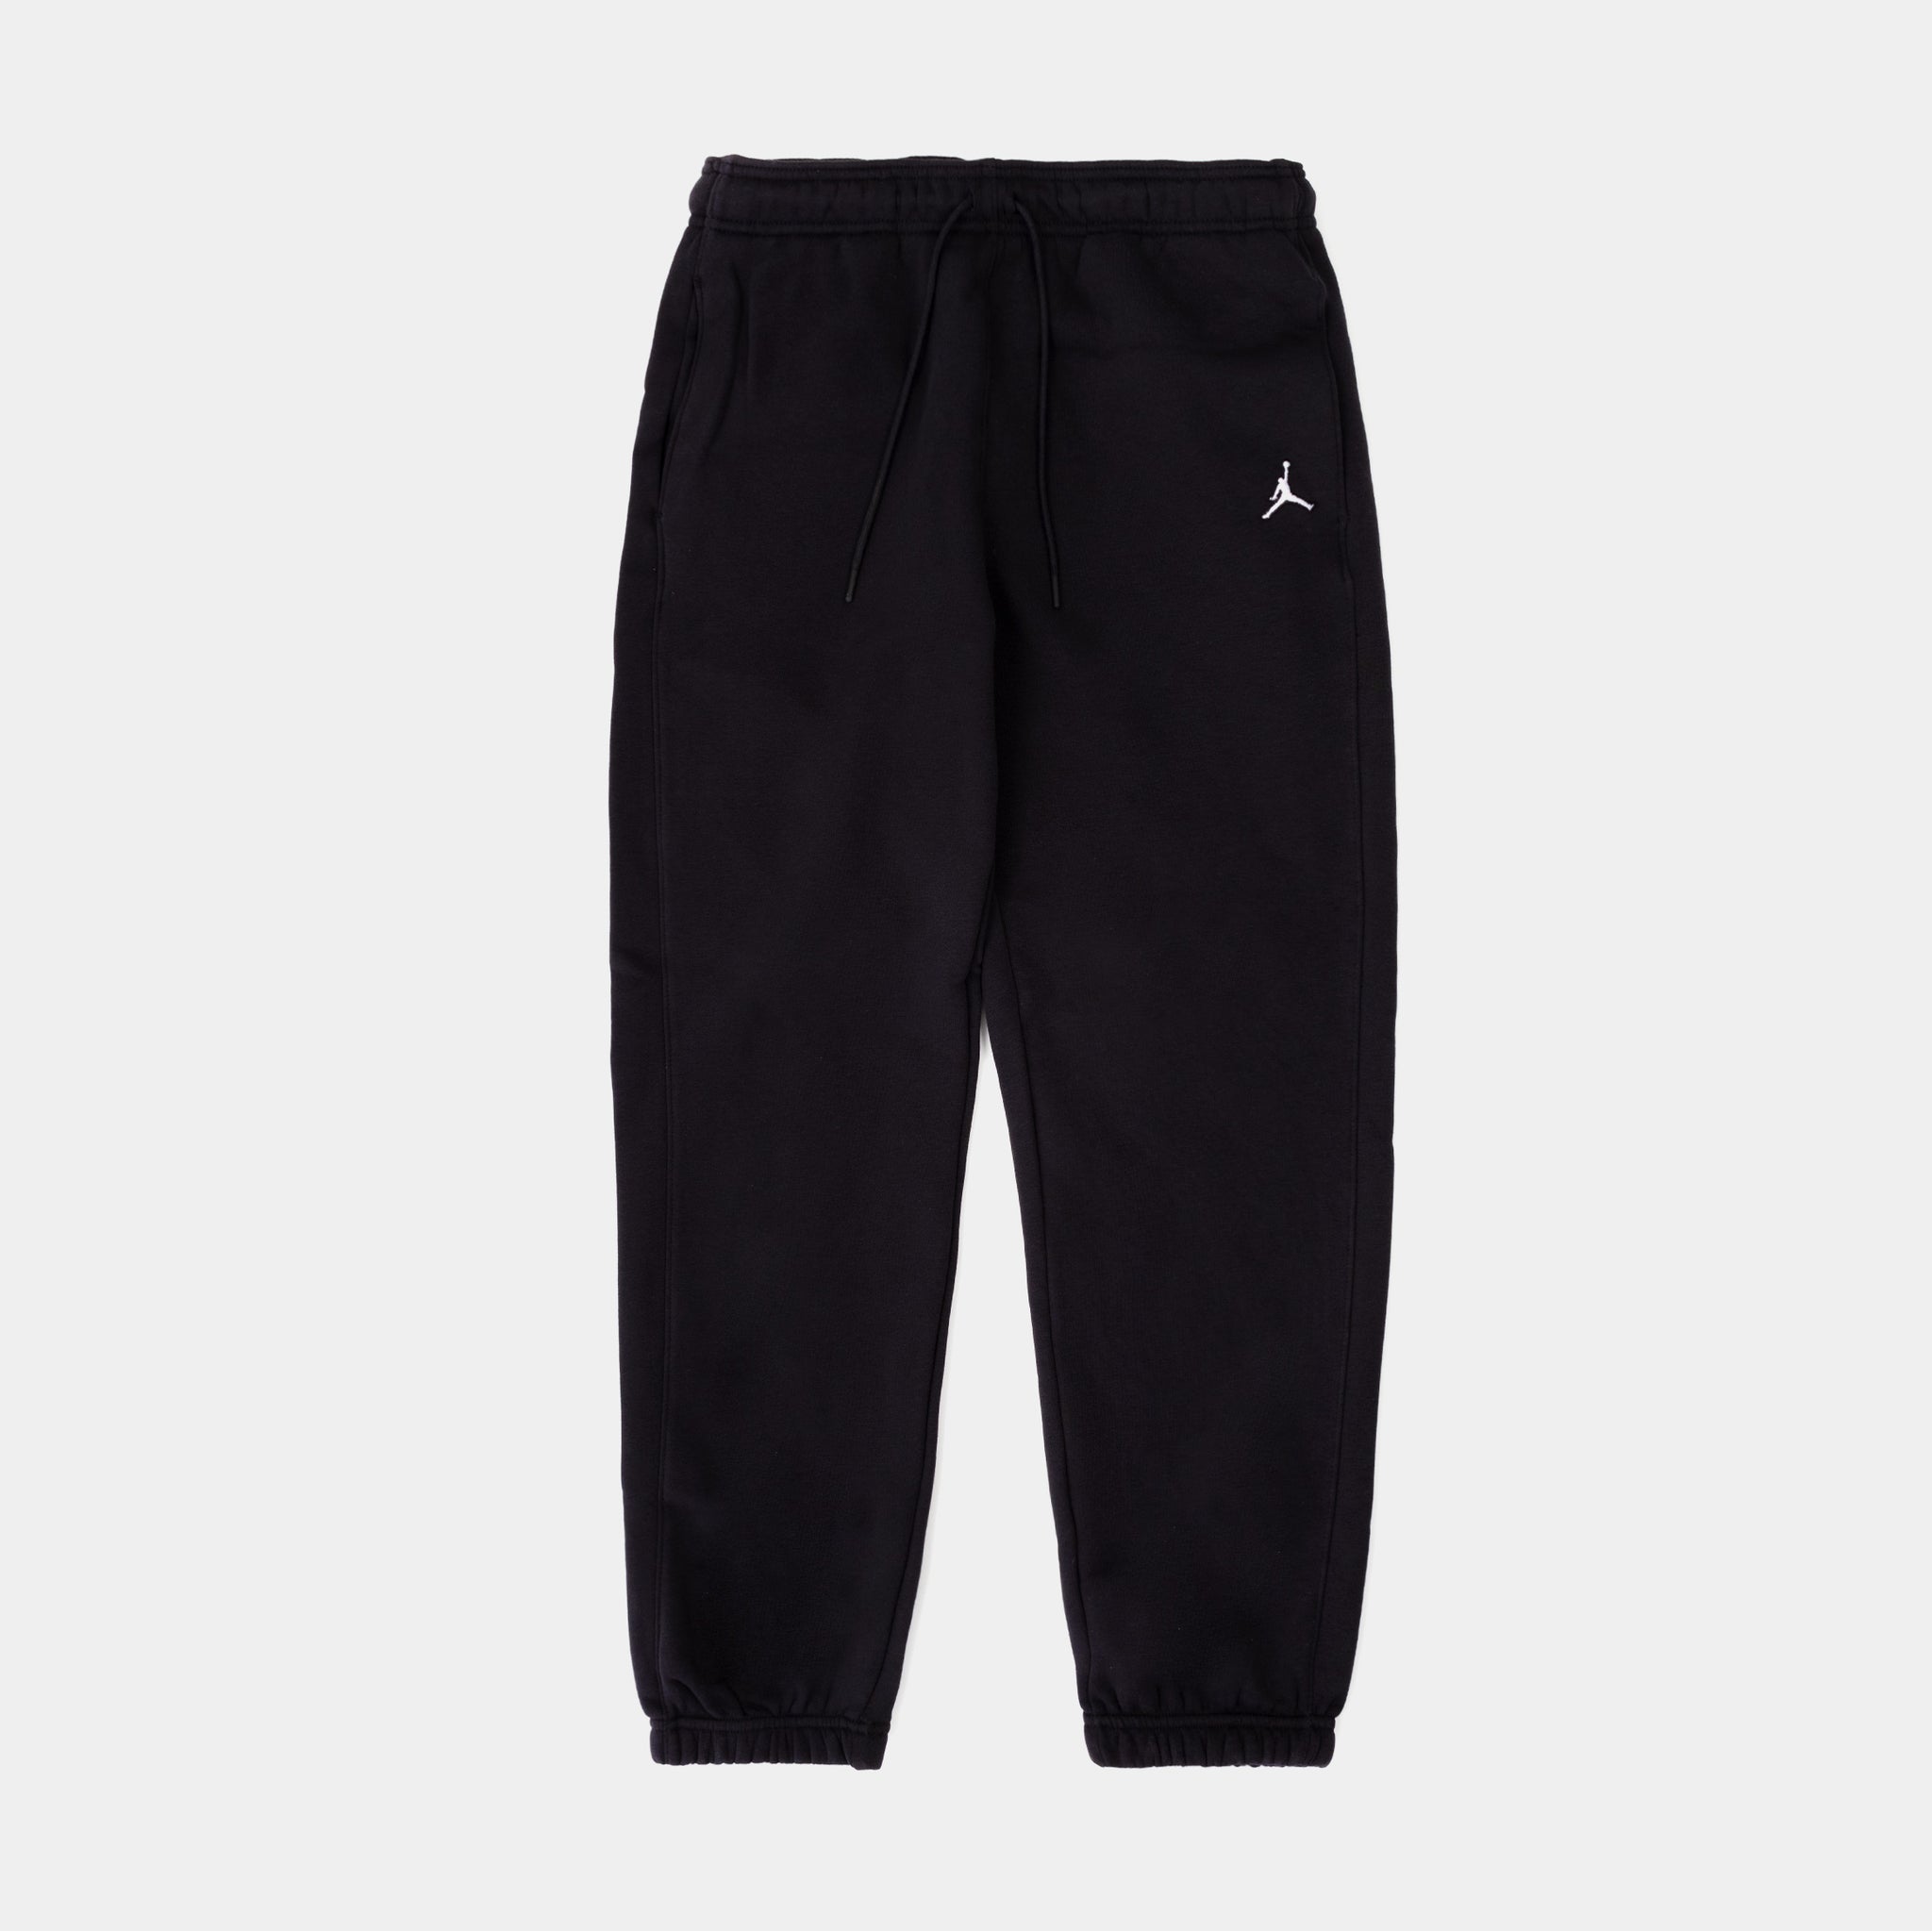 Brooklyn Jogger Pants  Shop Women's Joggers for Comfort & Style